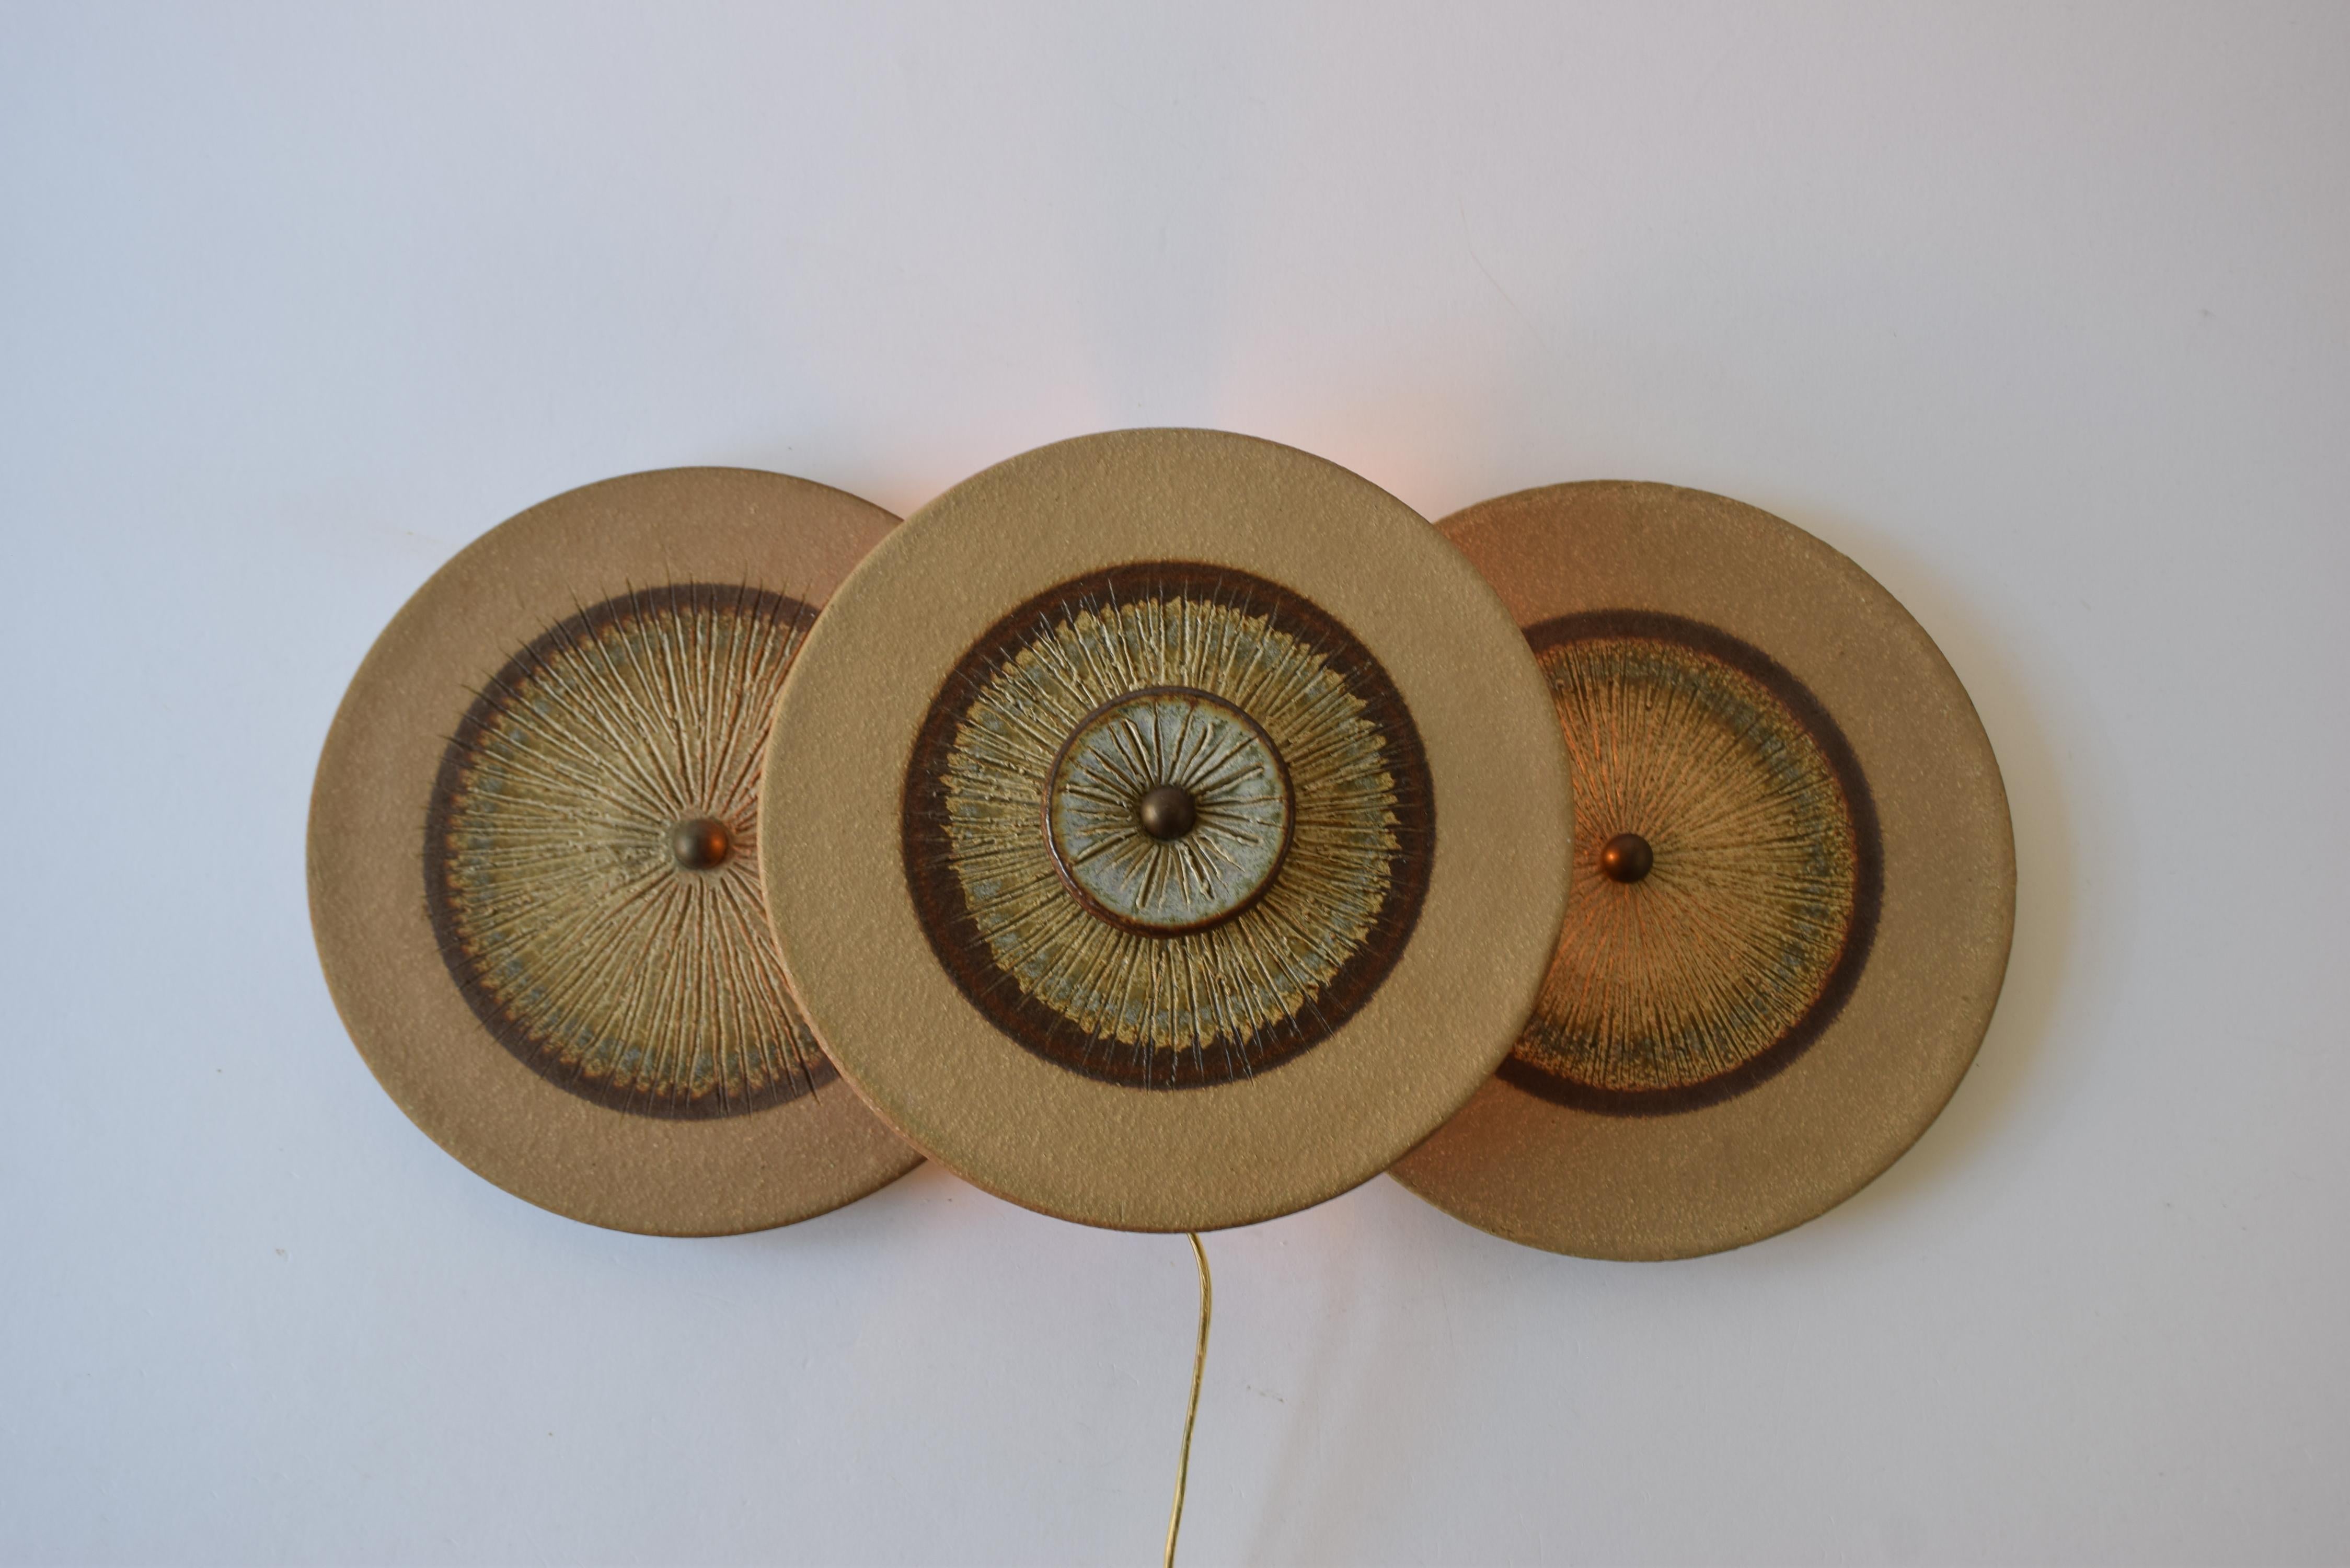 Large stylish Danish midcentury wall sconce.
The lamp is made the acknowledged pottery Søholm on Bornholm and the design is attributed to Noomi Backhausen & Poul Brandborg. Made ca. 1960s or 1970s

The lamp consists of overlapping circular disks